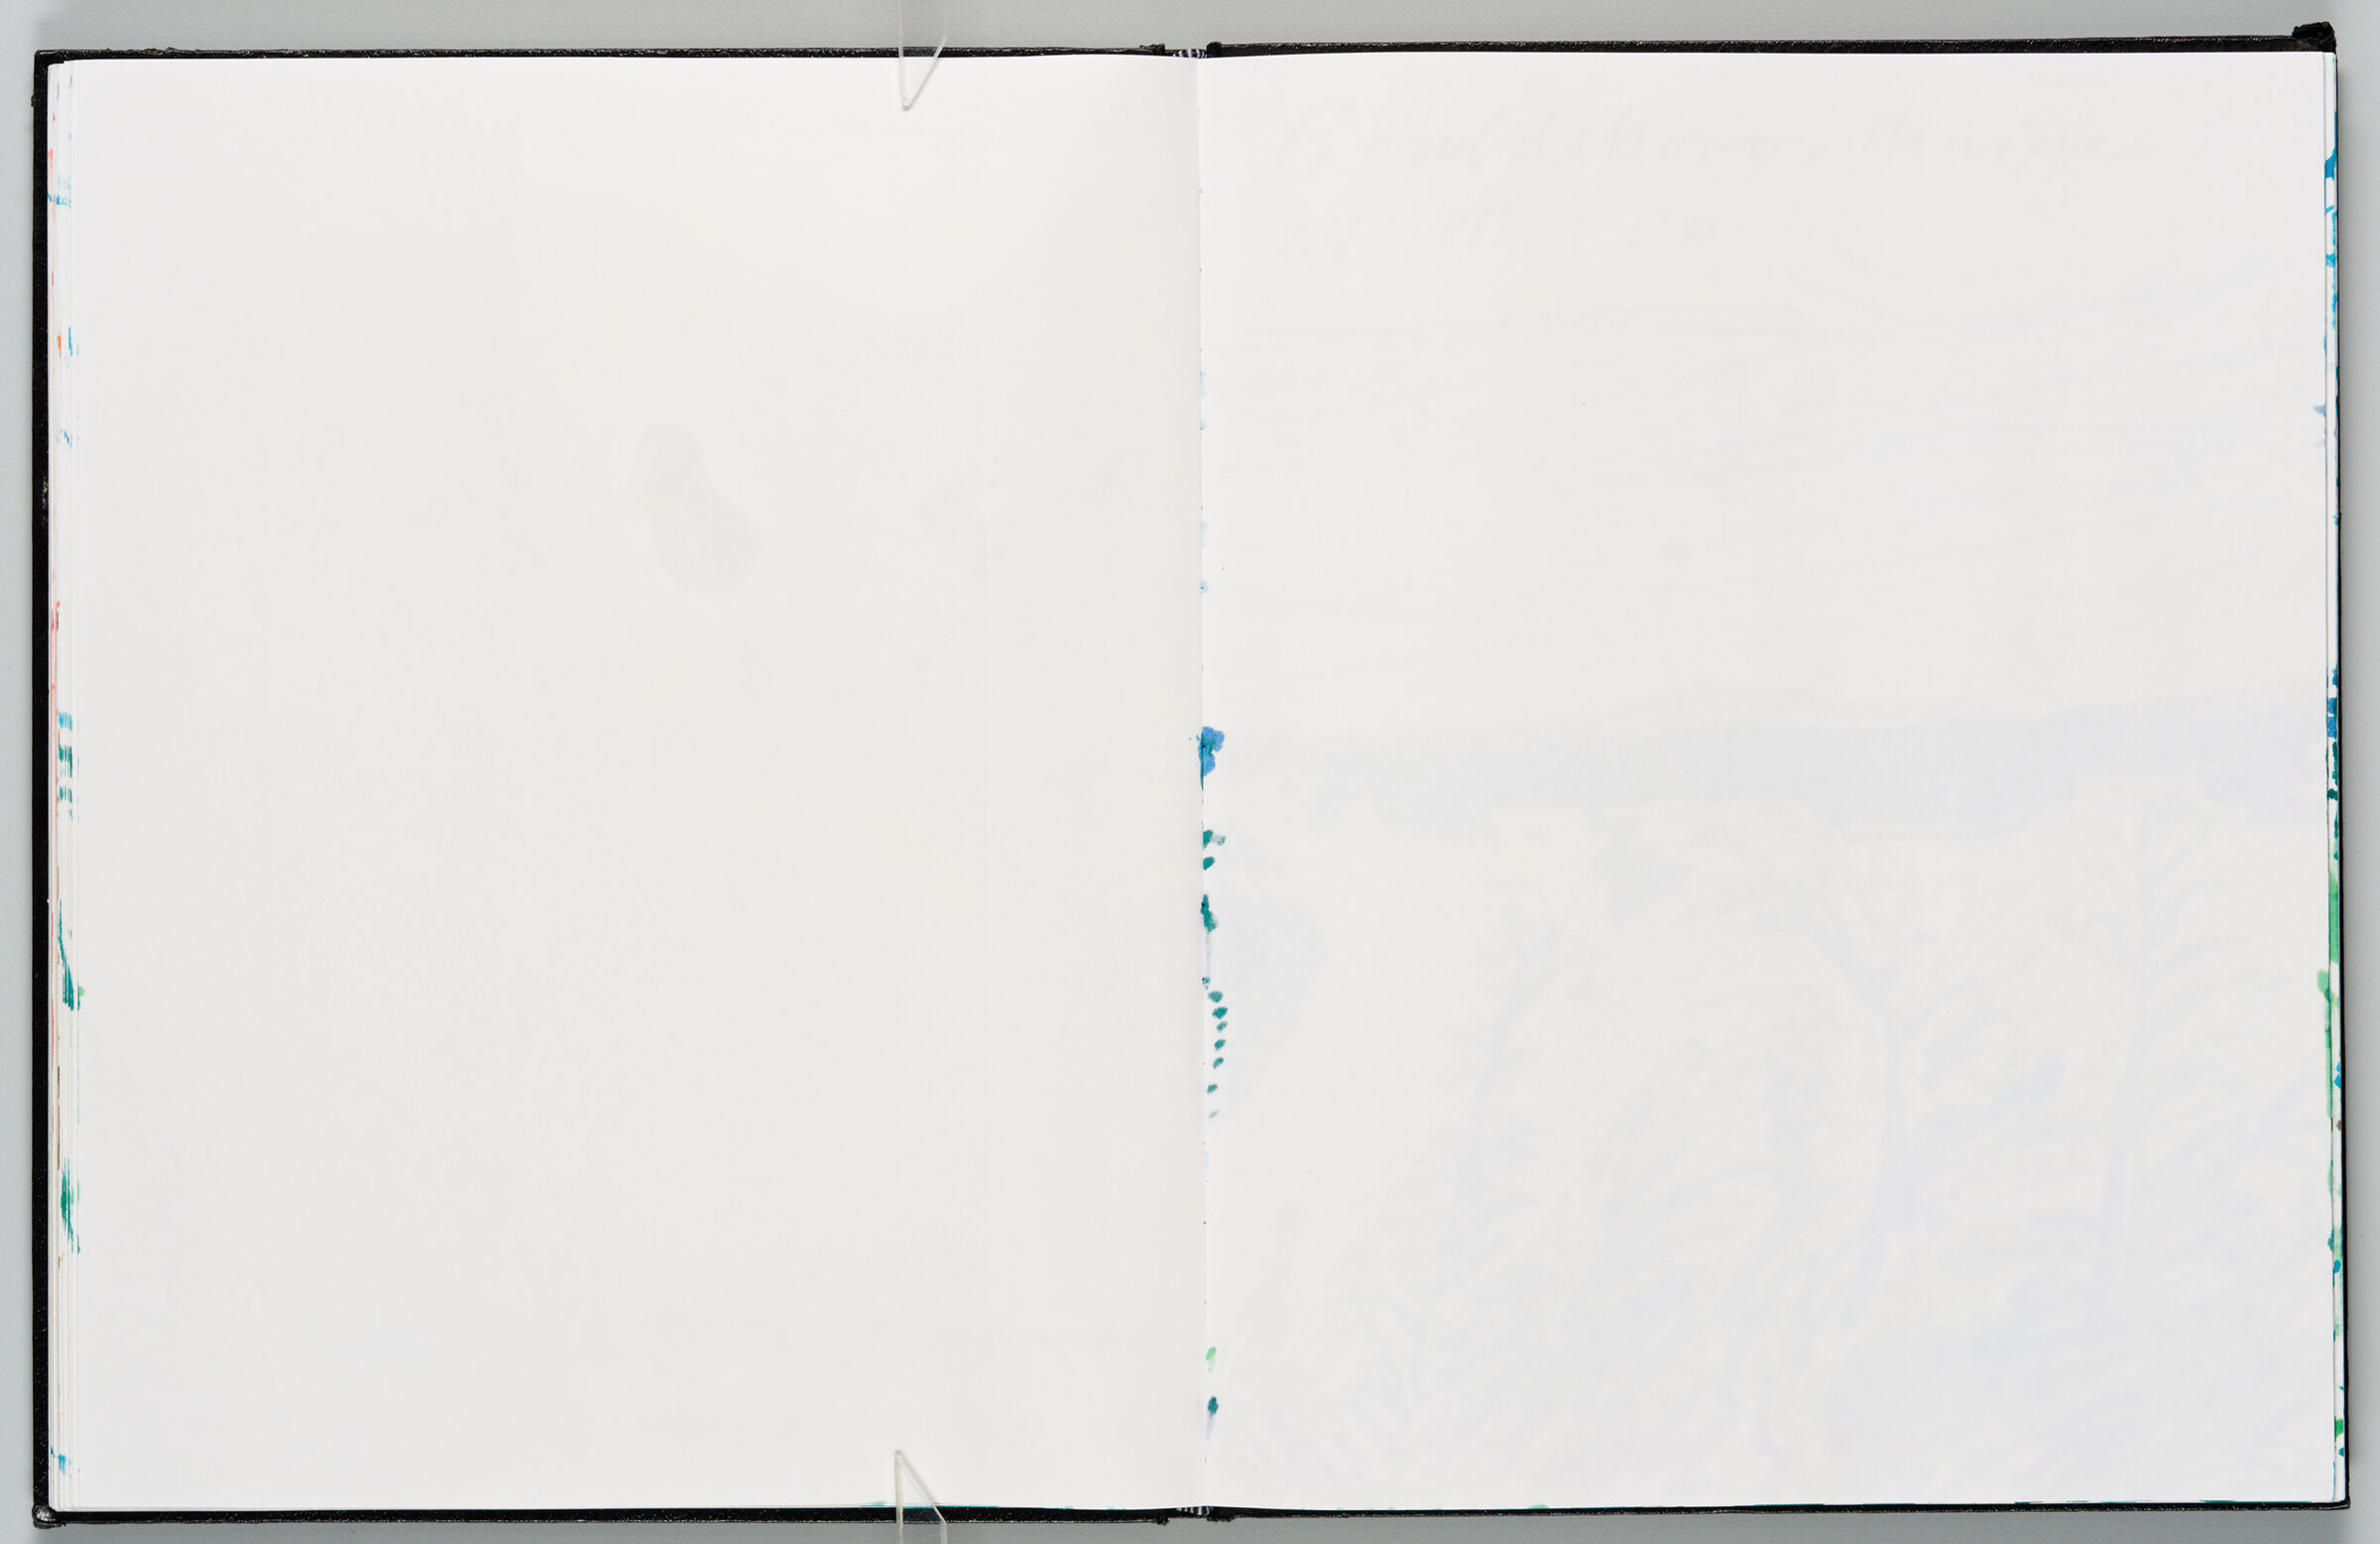 Untitled (Blank, Left Page); Untitled (Blank With Faint Bleed-Through, Right Page)